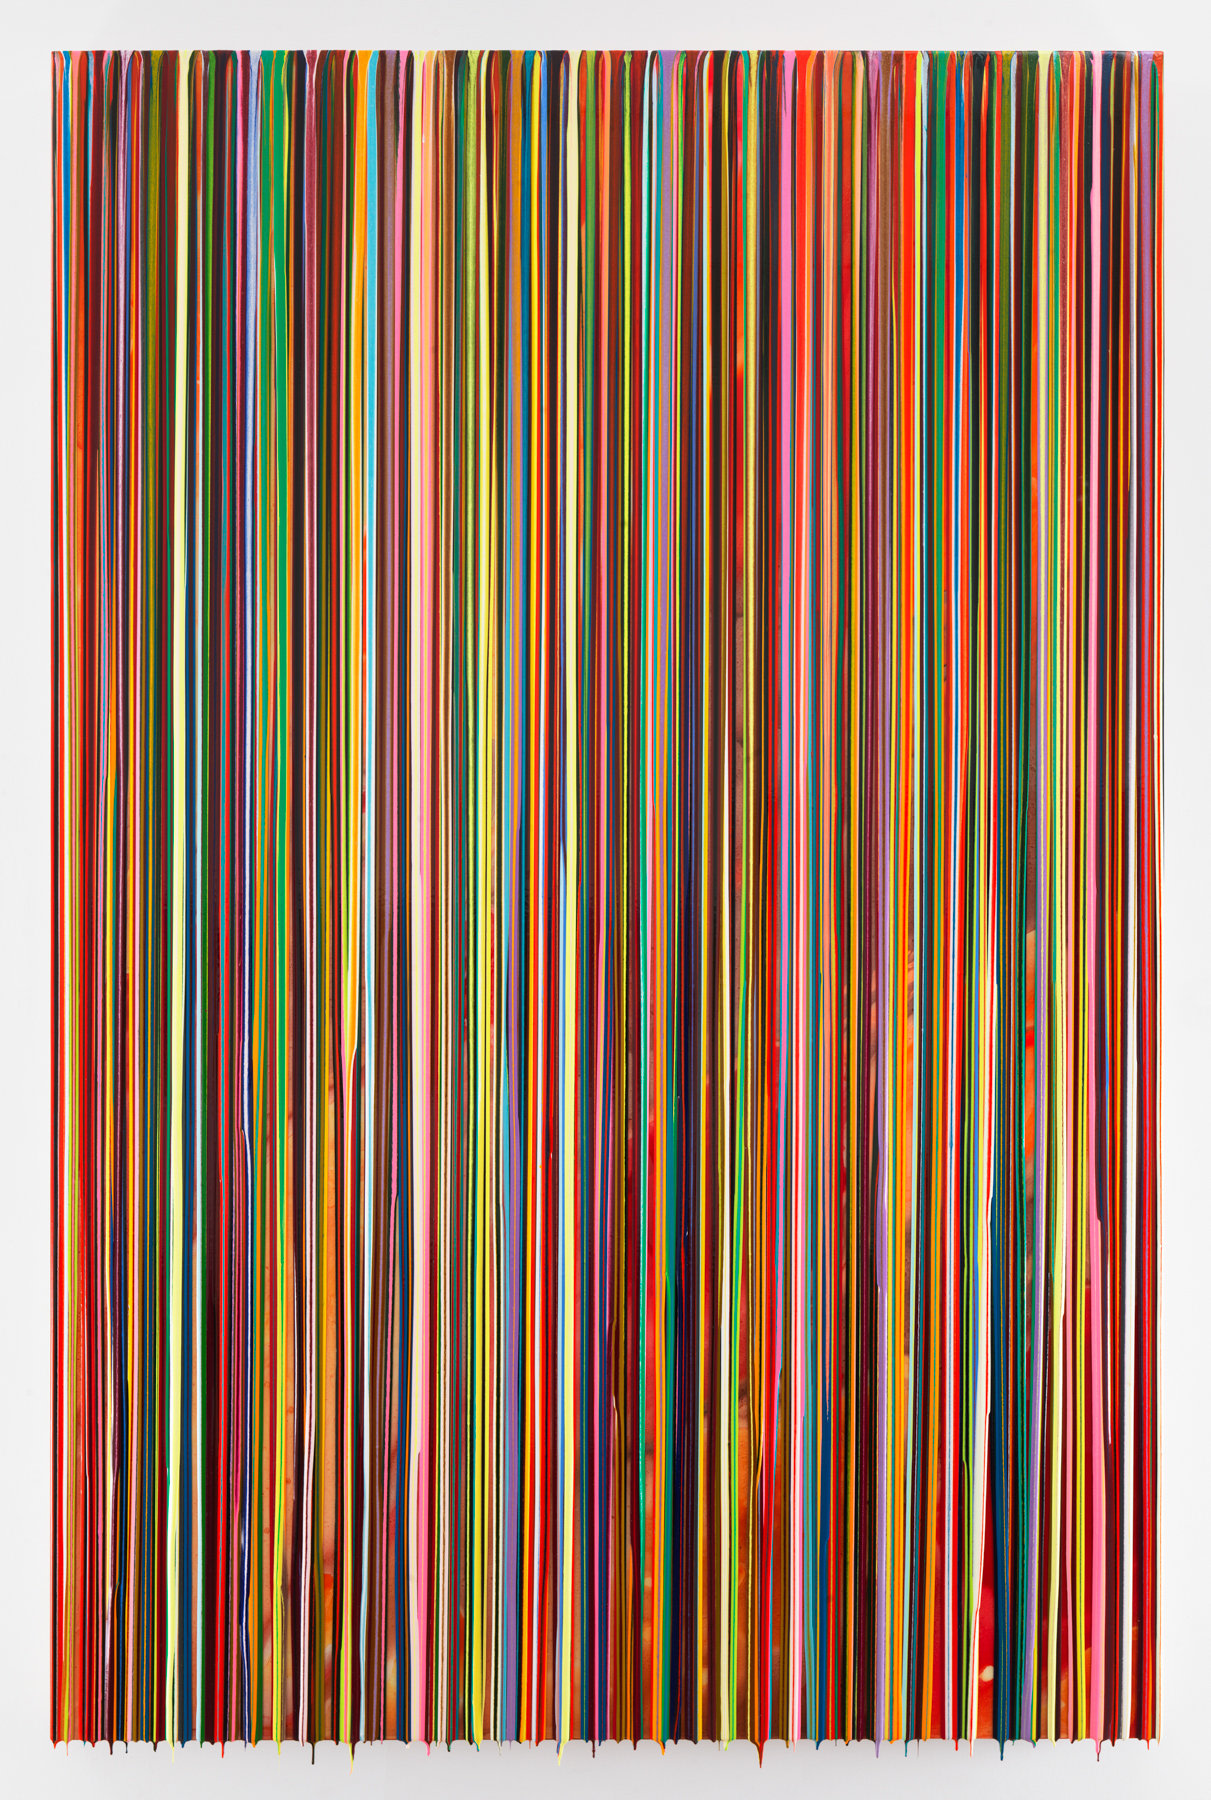 MYWORLDISNOTMYWORLD, 2016, Epoxy resin and pigments on wood, 90 x 60 inches, 228.6 x 152.4 cm, AMY#28434